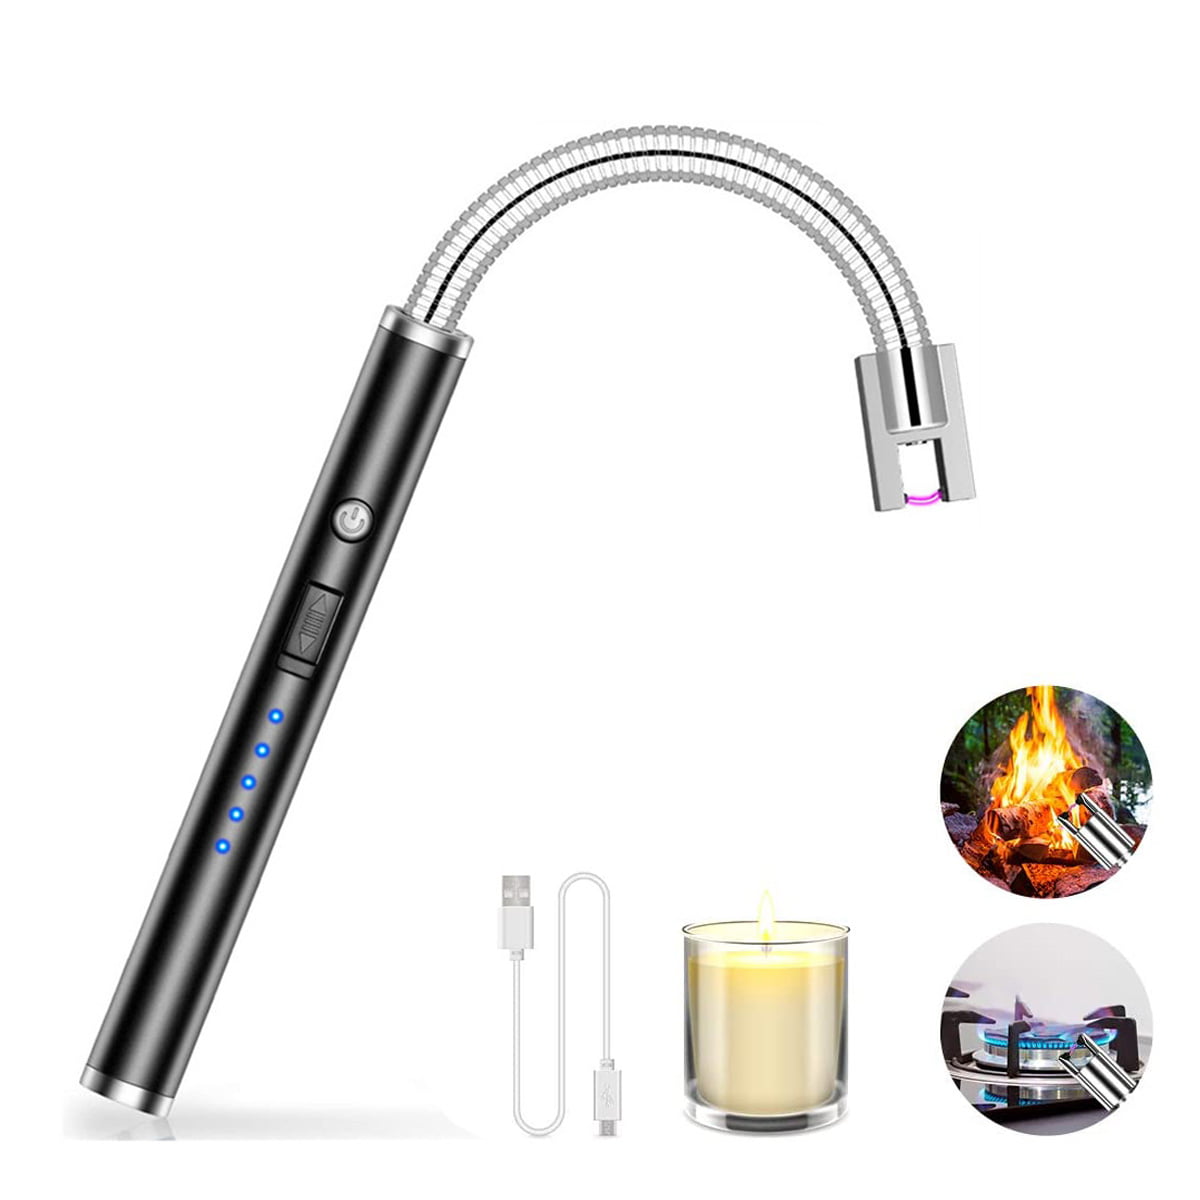 Silver Candle Lighter,Electronic Lighters Long Reach USB Rechargeable,Plasma Arc Flameless Lighter with LED Battery Display for Kitchen,Barbecue,Candles,Camping,Cooking,BBQs,Fireworks